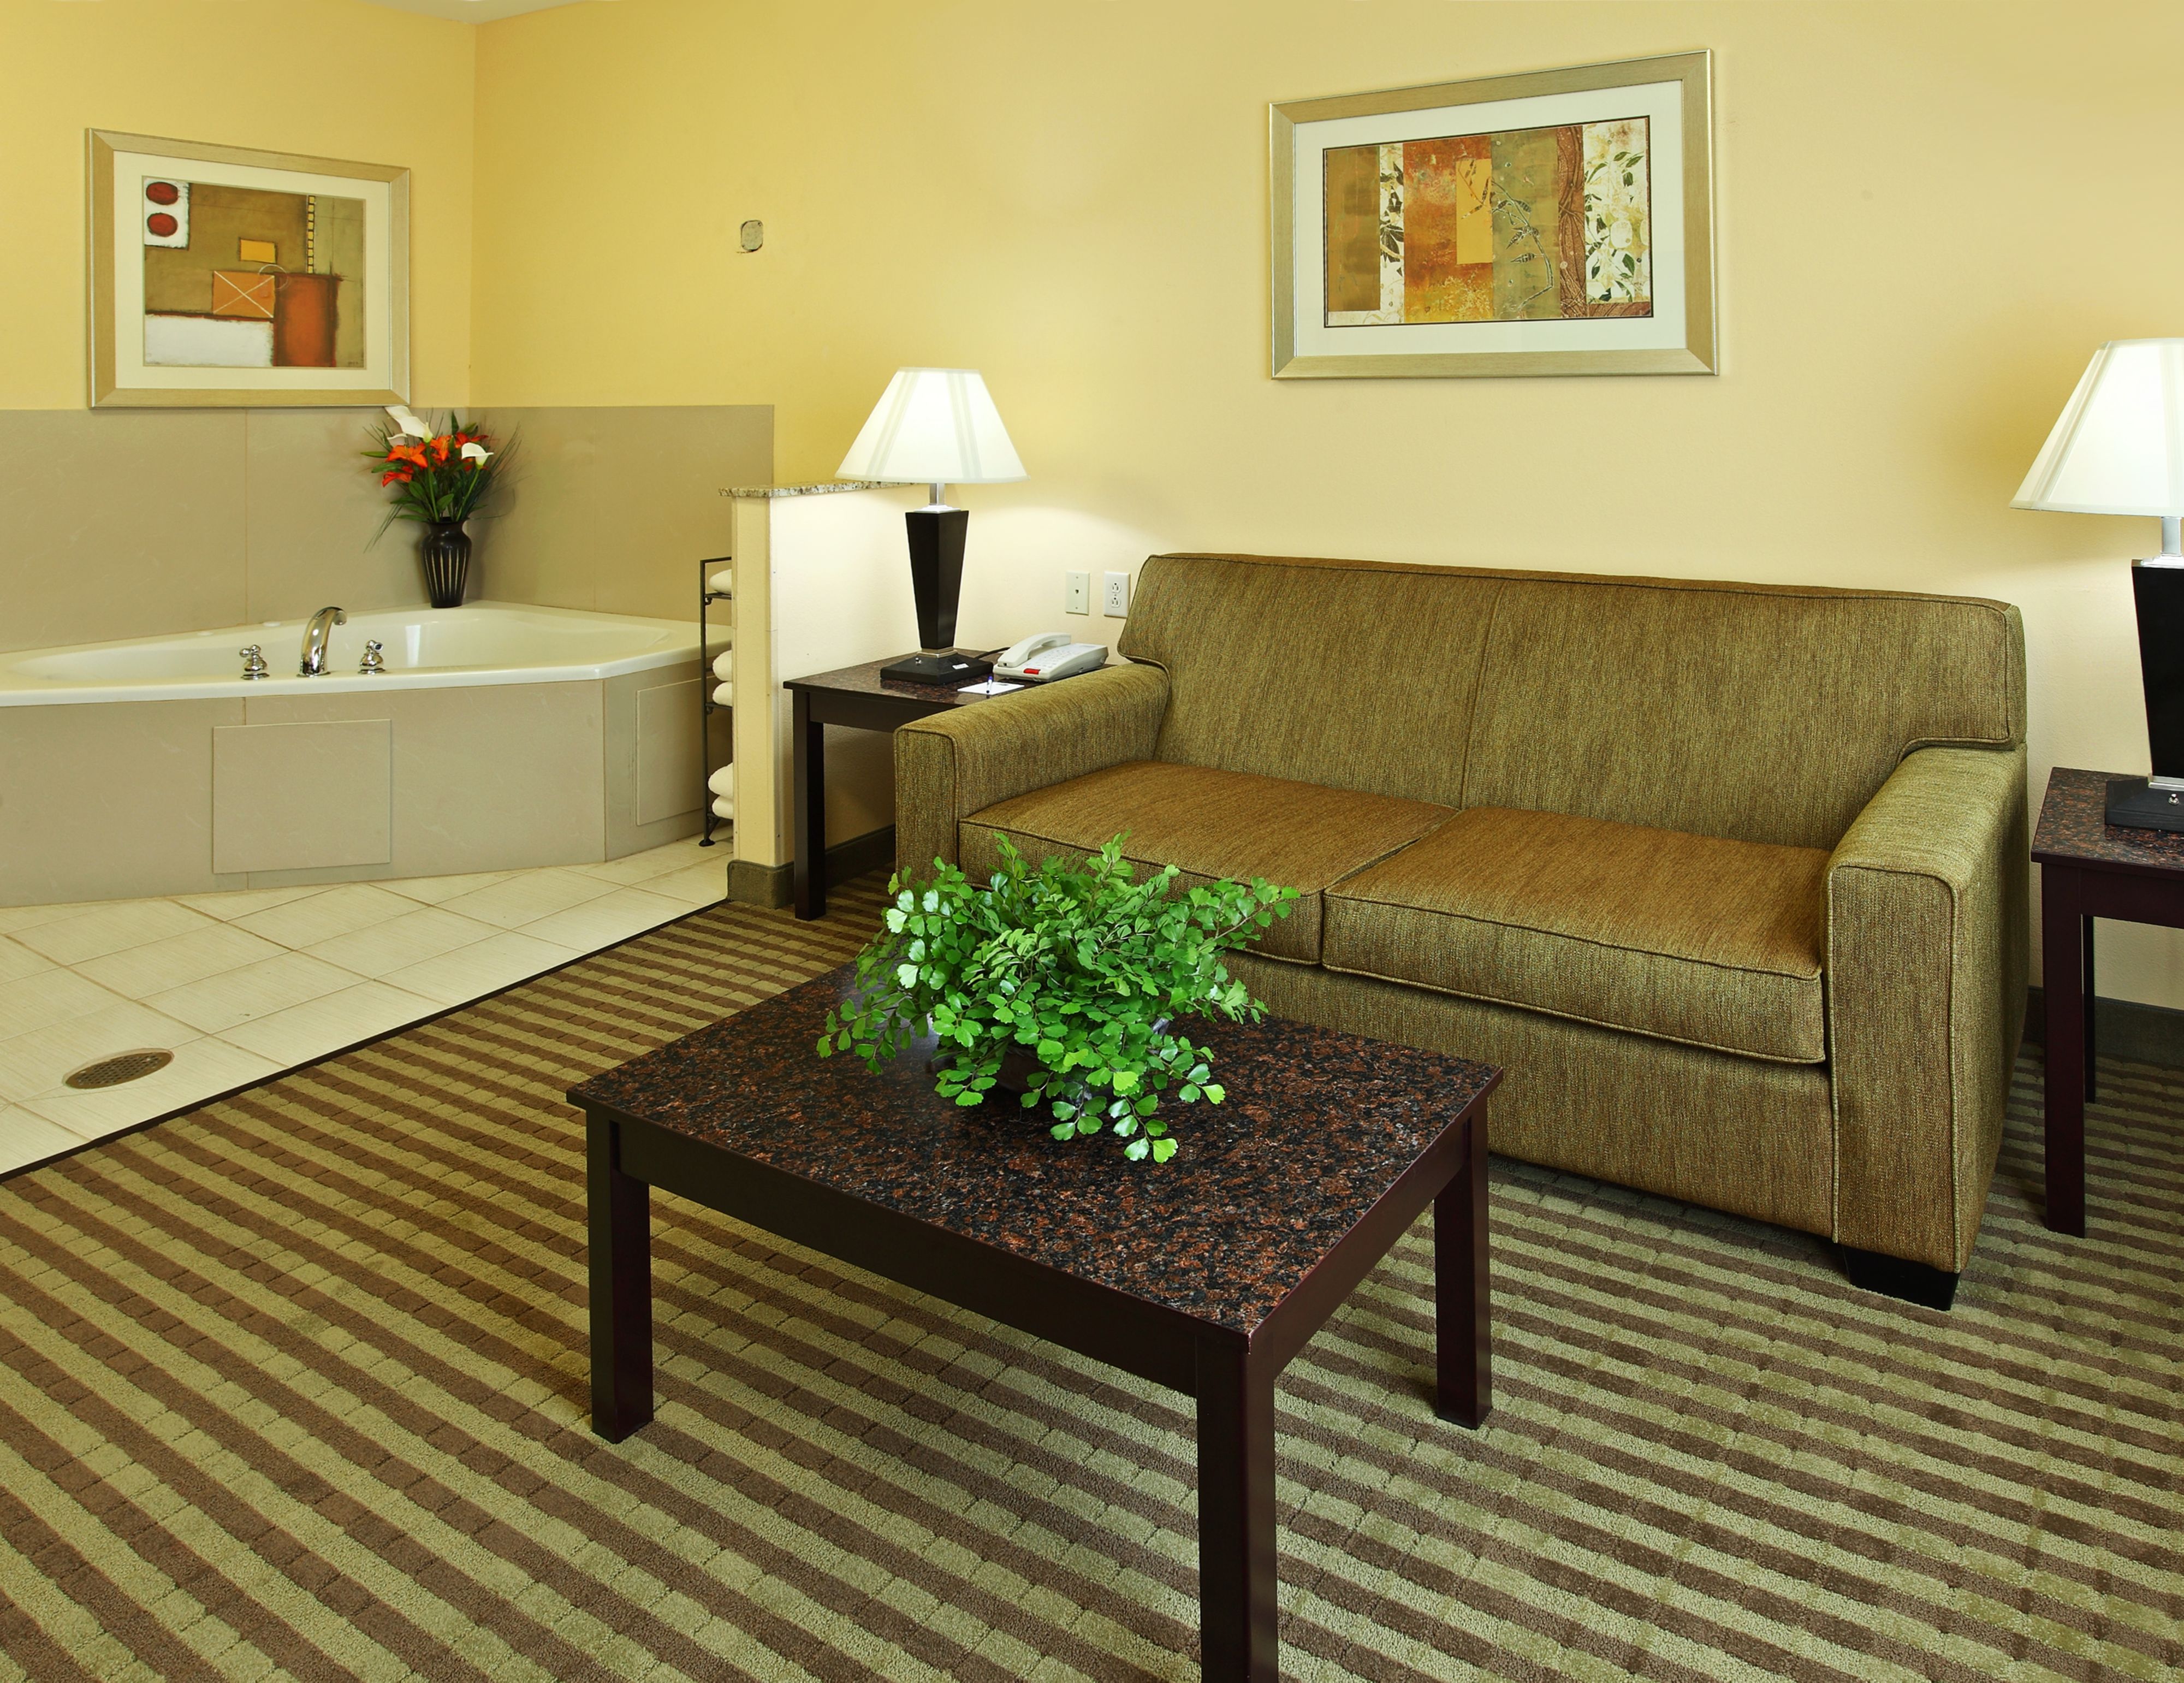 holiday-inn-express-and-suites-carthage-4232759671-original.jpg